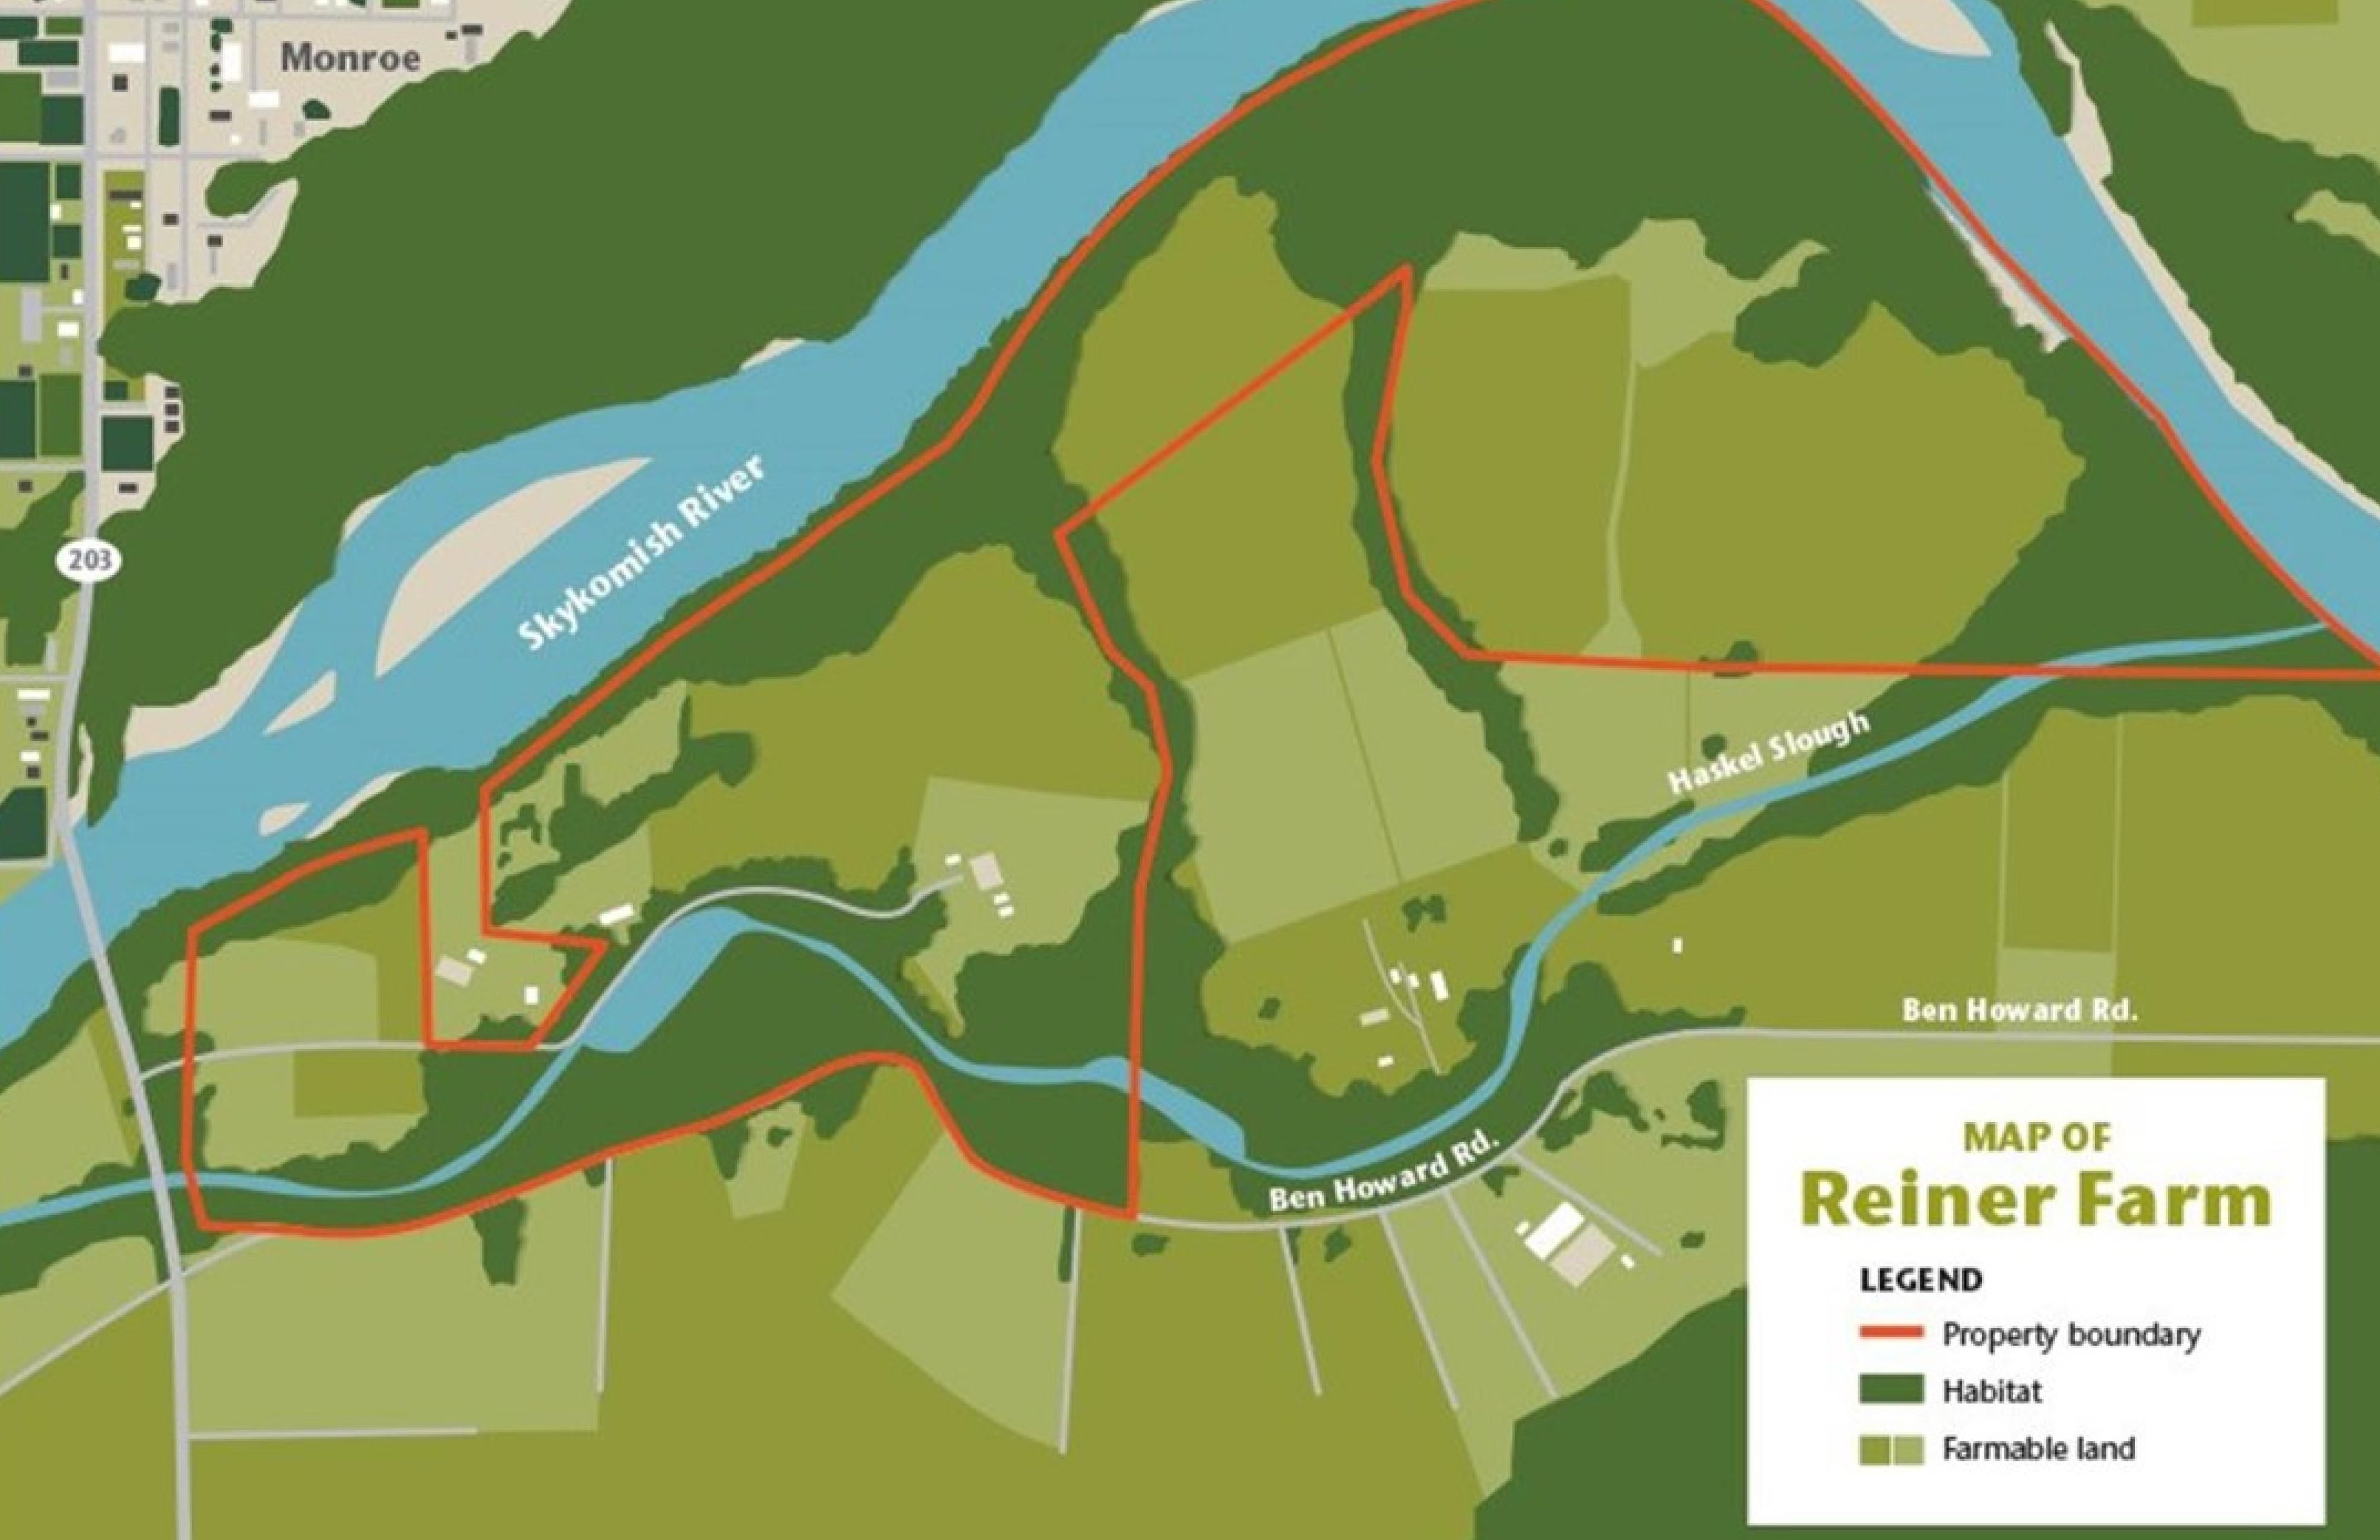 map of reiner farm. Red line represents property 
                                             boundary. dark green is habitat and light green is farmable land